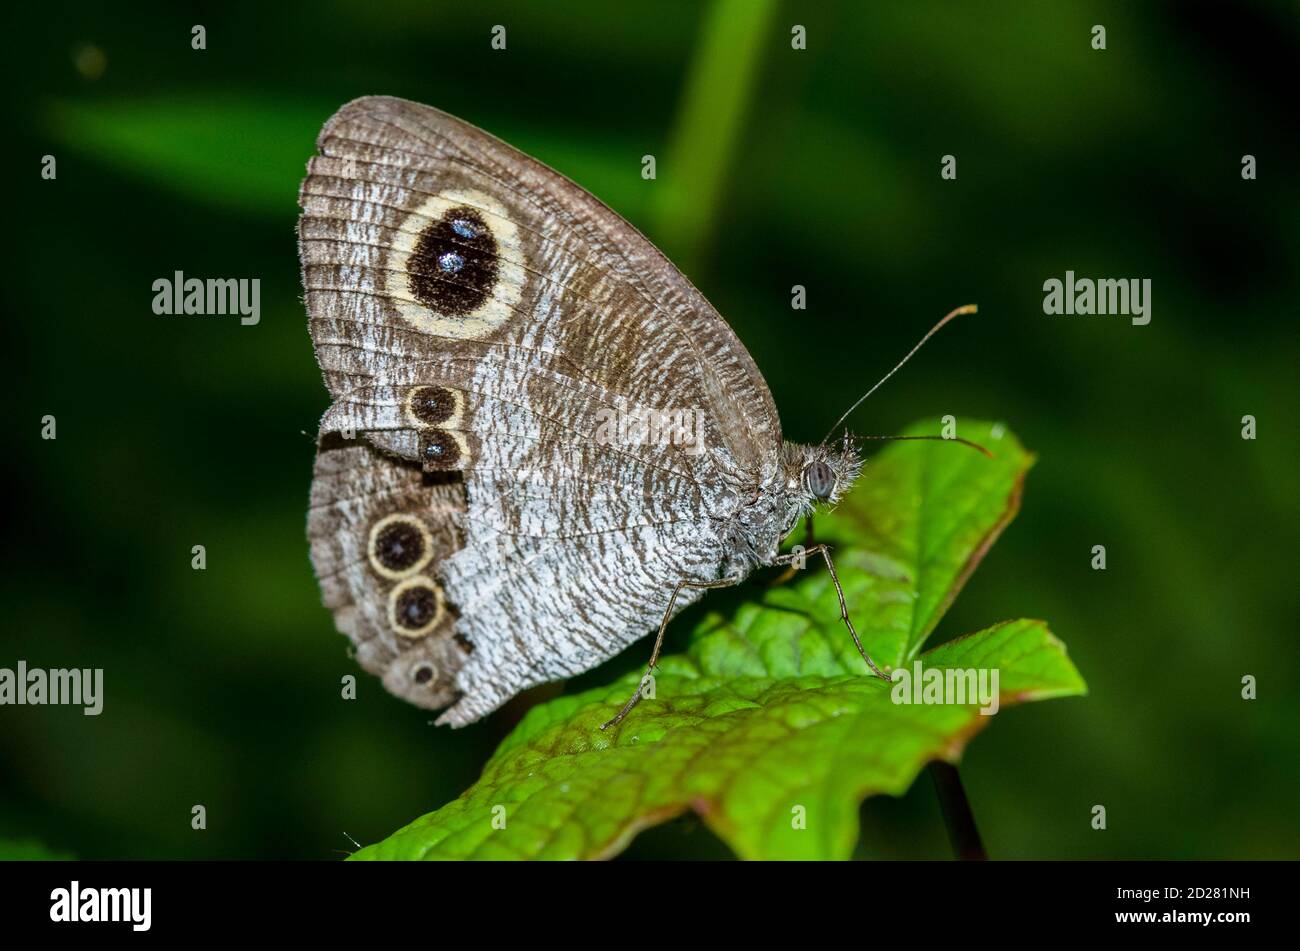 Common Five Ring Butterfly, Ypthima baldus, on leaf, Klungkung, Bali, Indonesia Stock Photo